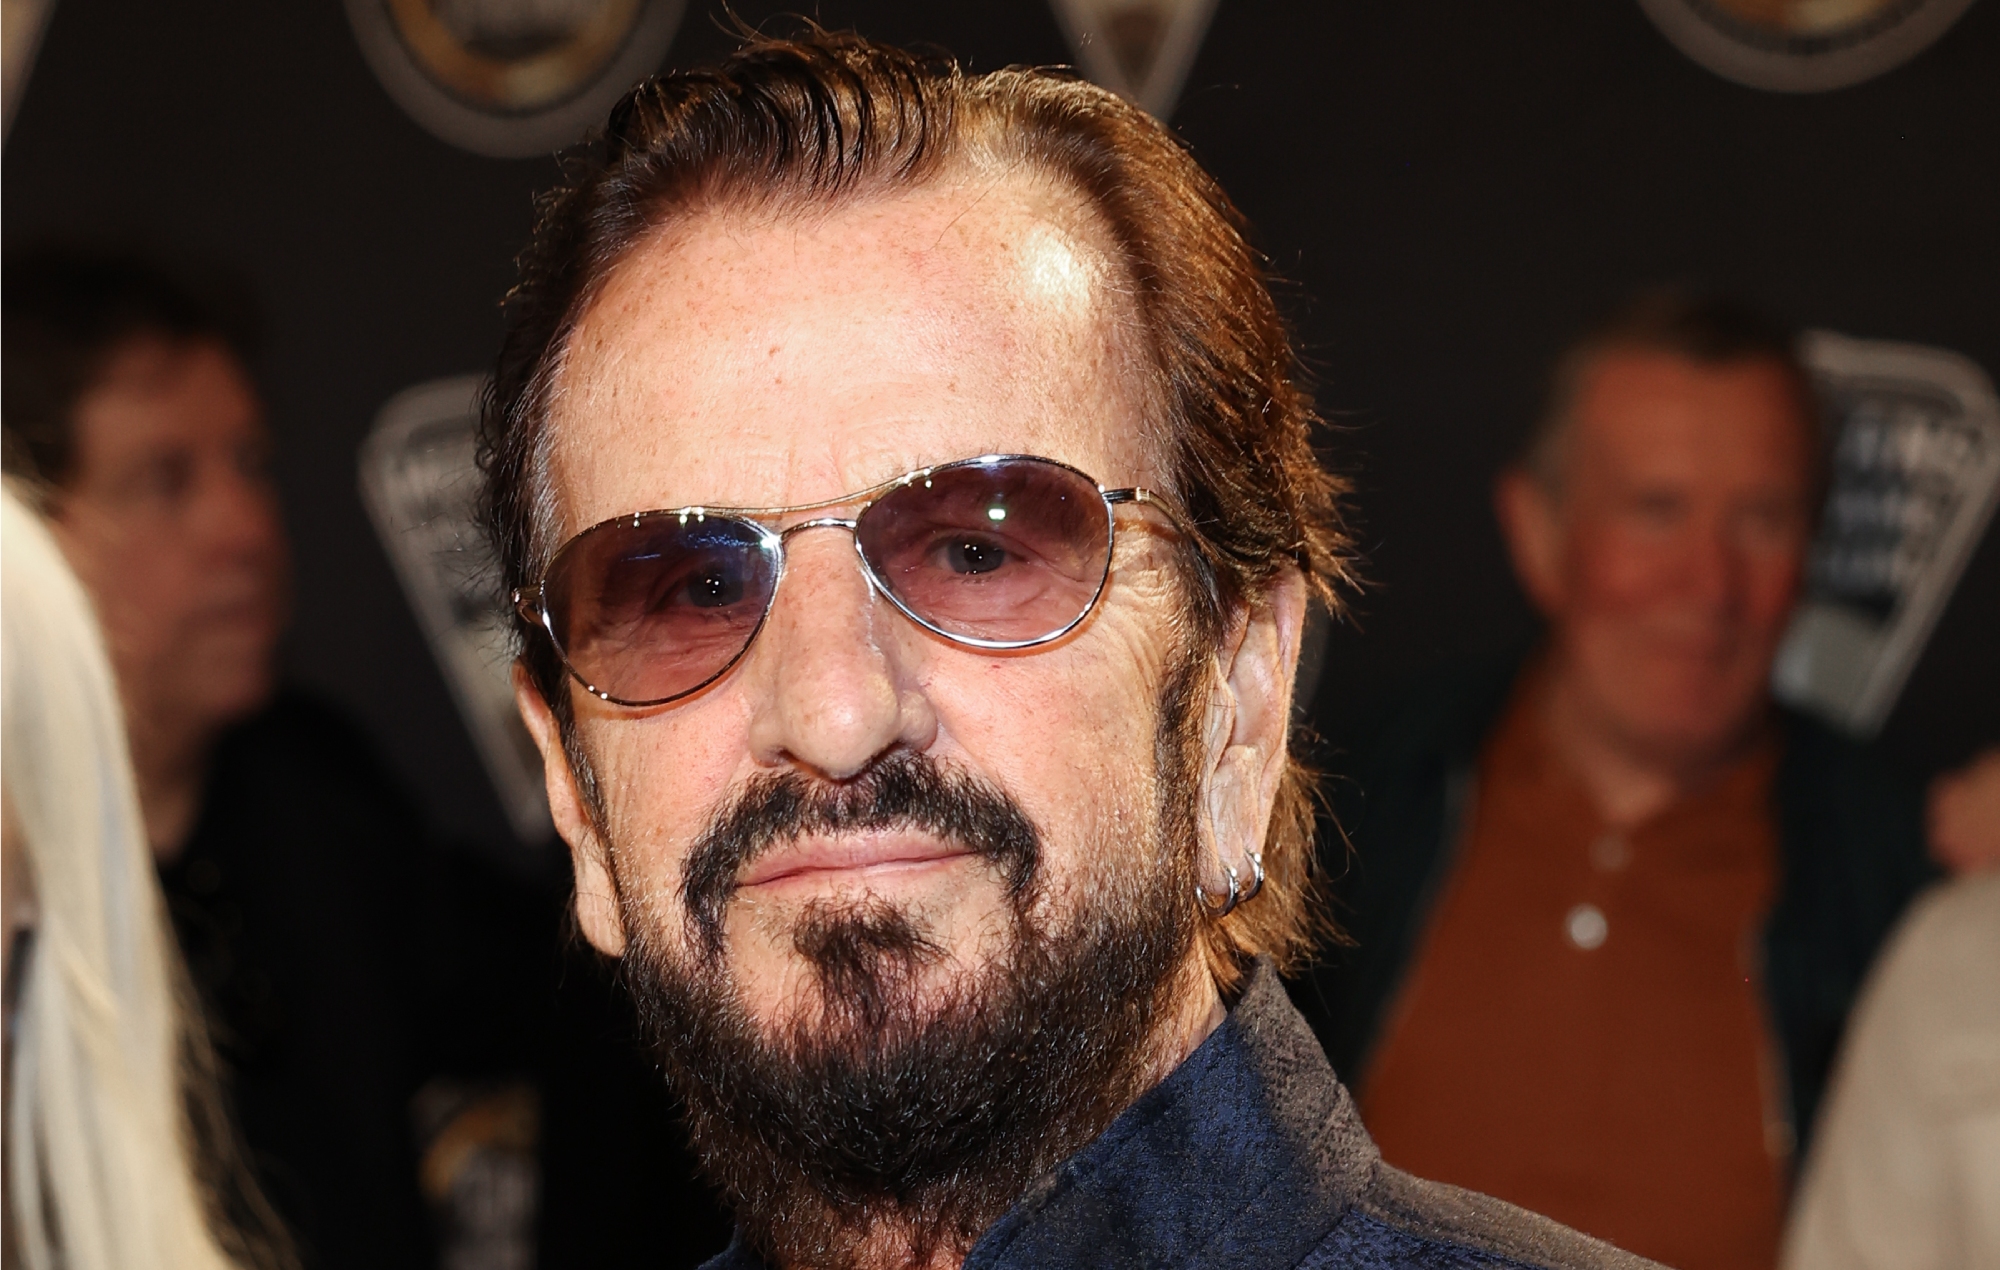 Ringo Starr reacts to “incredible” news that The Beatles are Number One